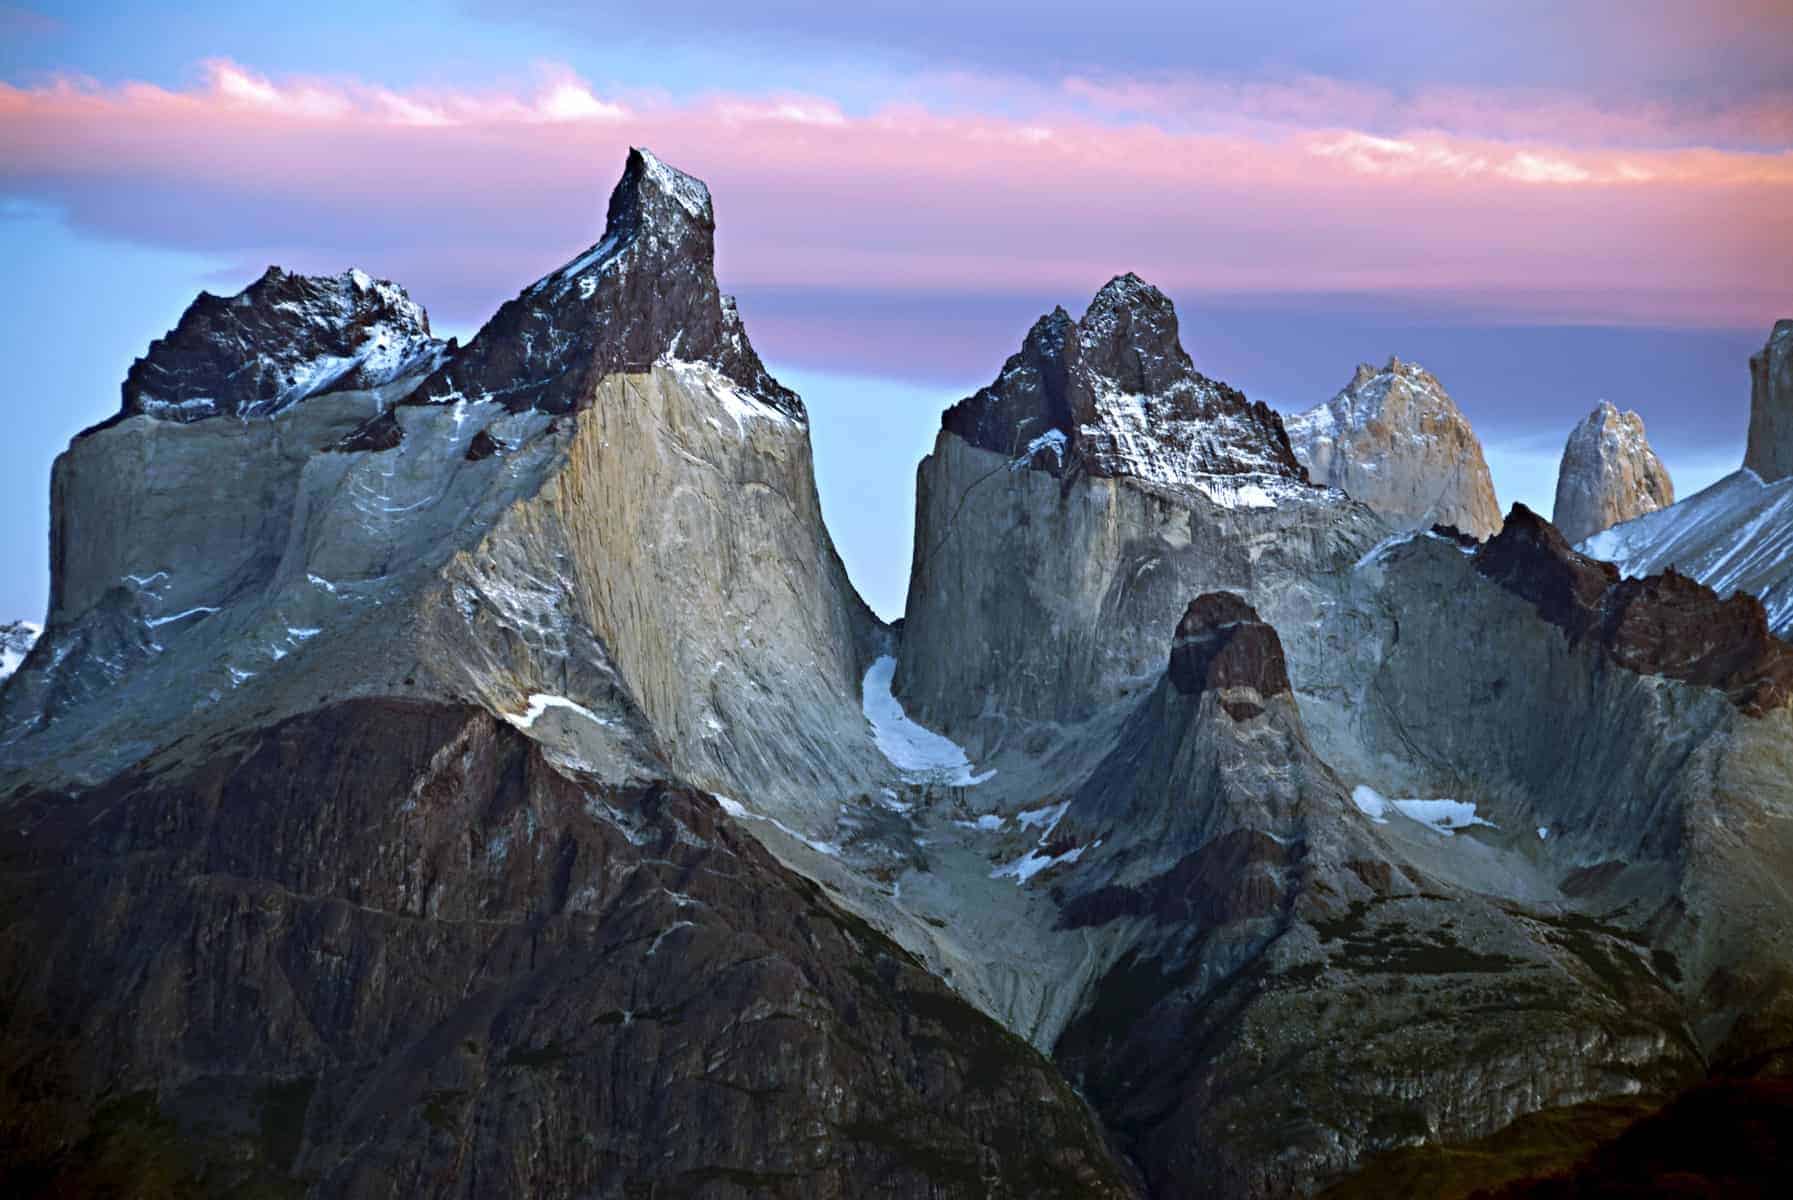 The Cuernos del Paine in Torres del Paine National Park, Chile, at sunrise